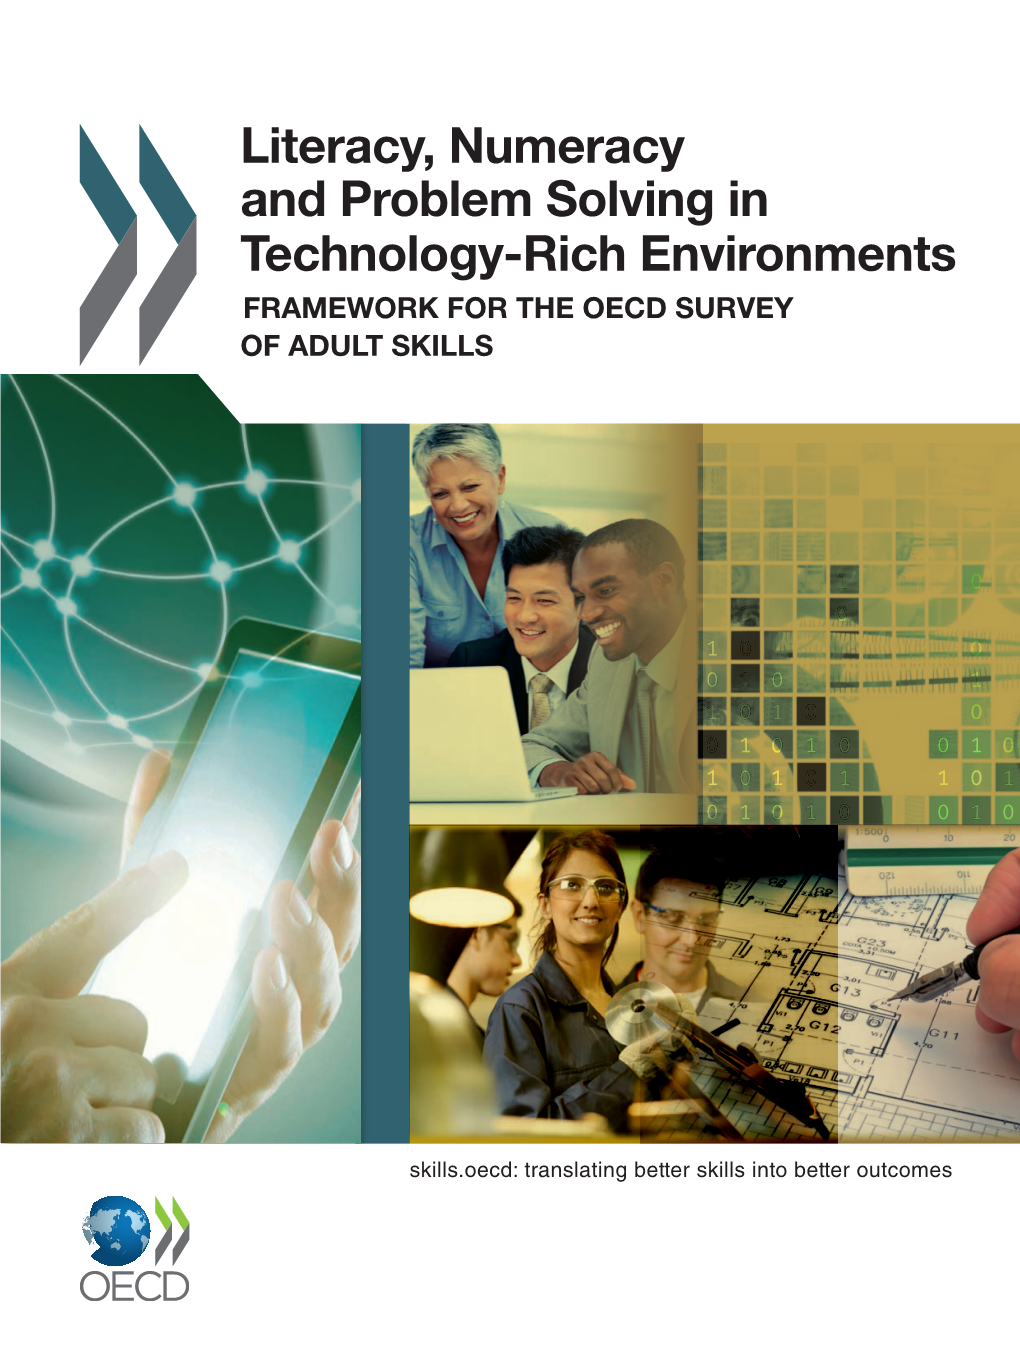 Literacy, Numeracy and Problem Solving in Technology-Rich Environments Framework for the OECD Survey of Adult Skills